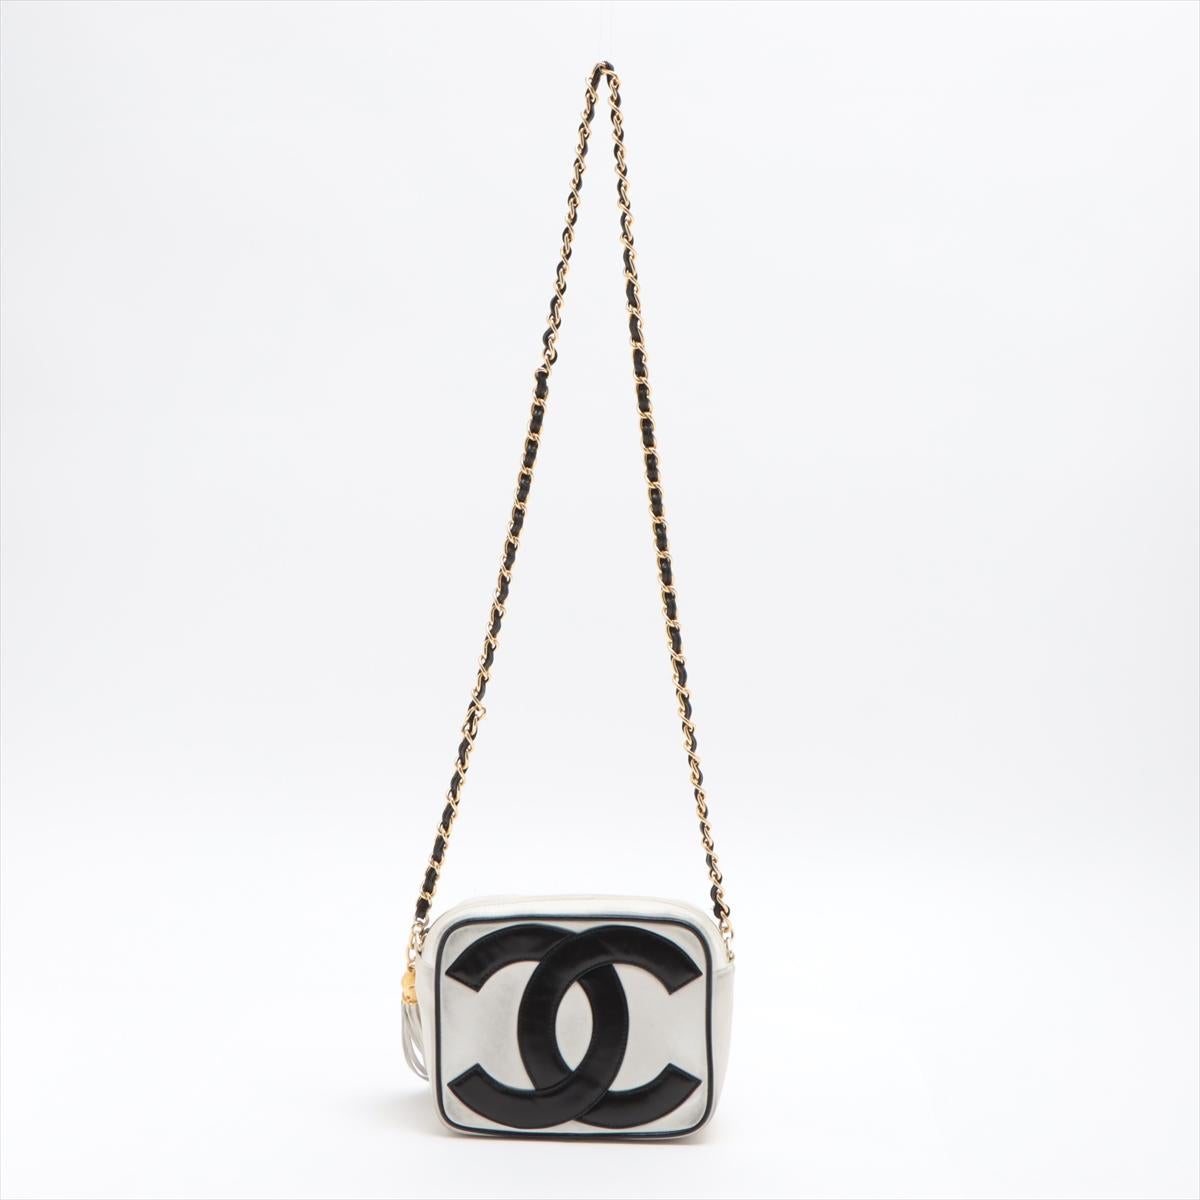 This vintage Chanel bag is crafted from white leather and adorned with the brand's black logo appliqué on both sides, featuring zip closure with tassel, single long chain woven chain-link and leather shoulder strap, white leather lining, one zip